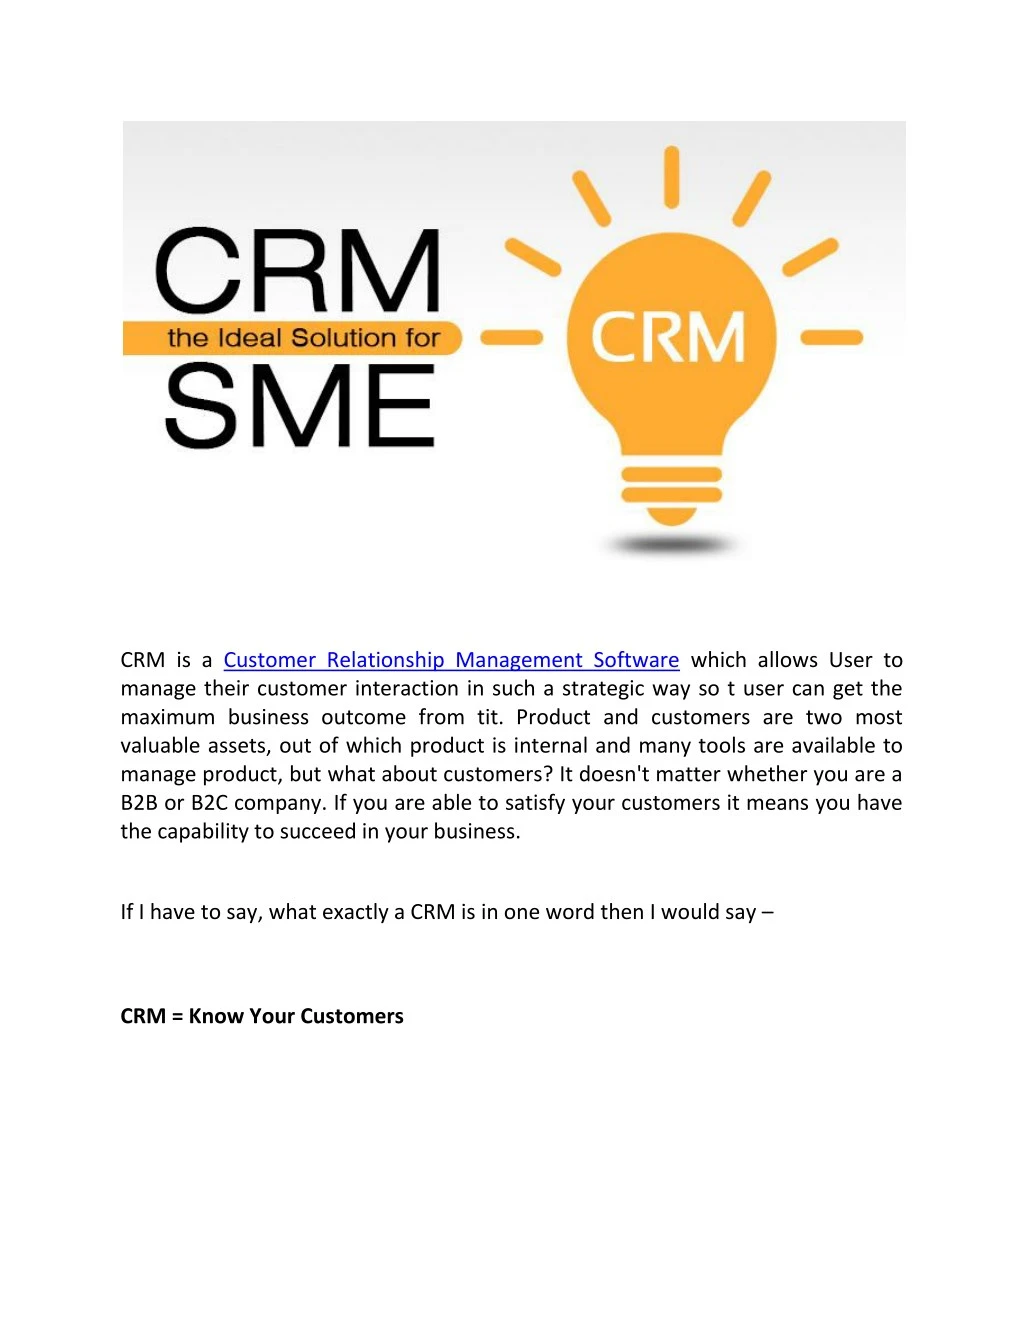 crm is a customer relationship management